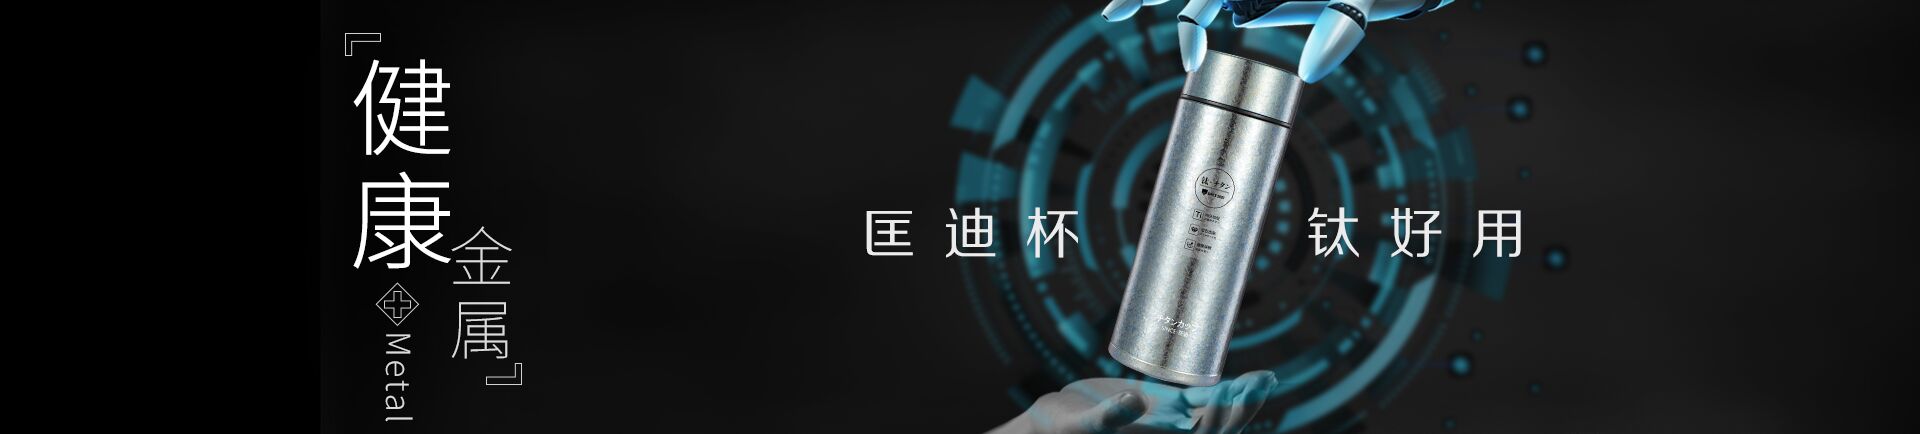 Zhejiang kuangdi,kuangdi industry and trade - zhejiang kuangdi industry and trade - focus on the thermos cup, thermos kettle, glass research and manufacture of large-scale enterprises